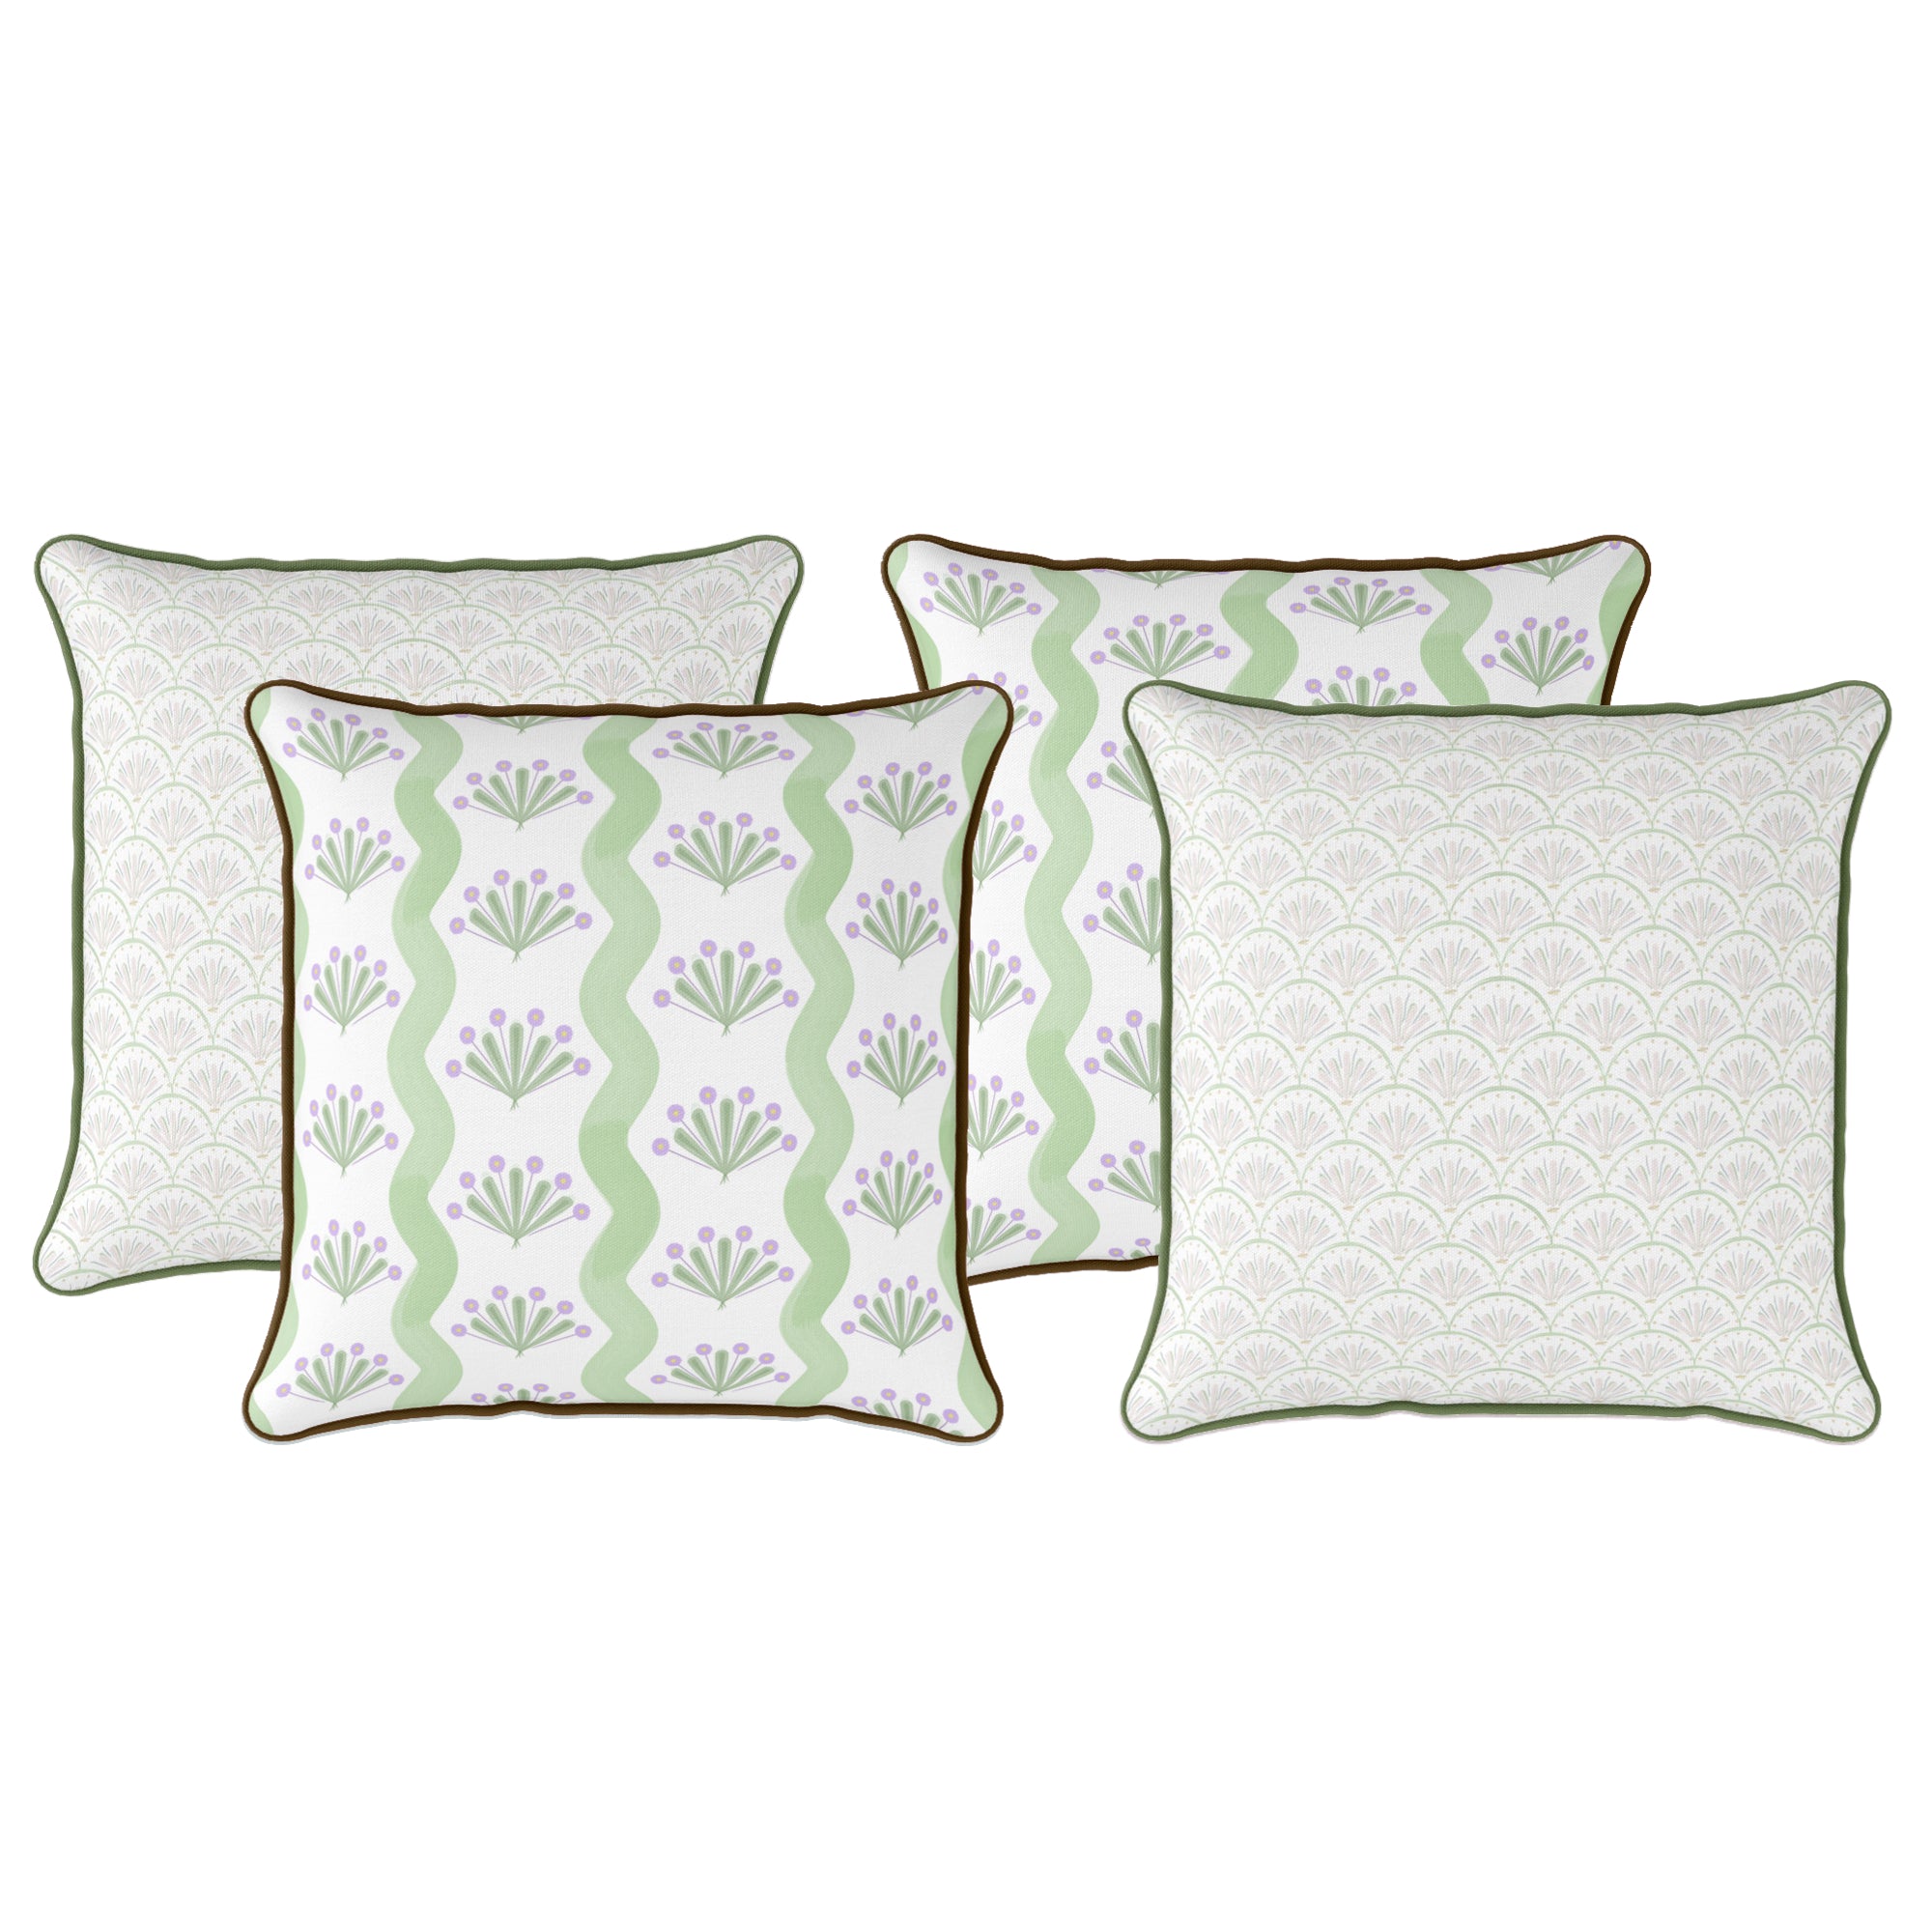 PillowSet13_softgreenfloralthrowdeocrativeforsofa_contrastingpiping.jpg